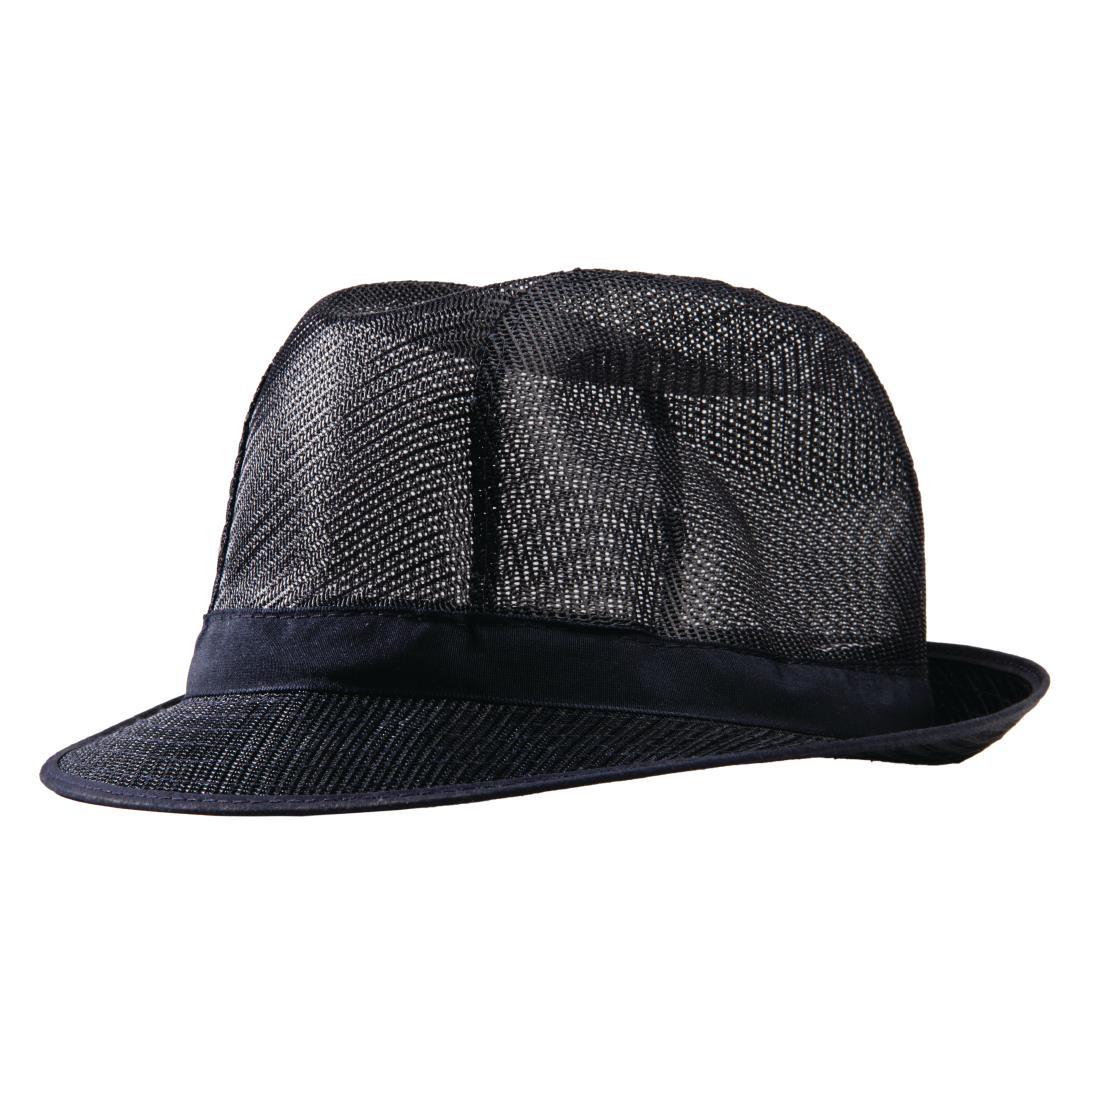 Trilby Hat with Snood Navy Blue S - A654-S  - 2